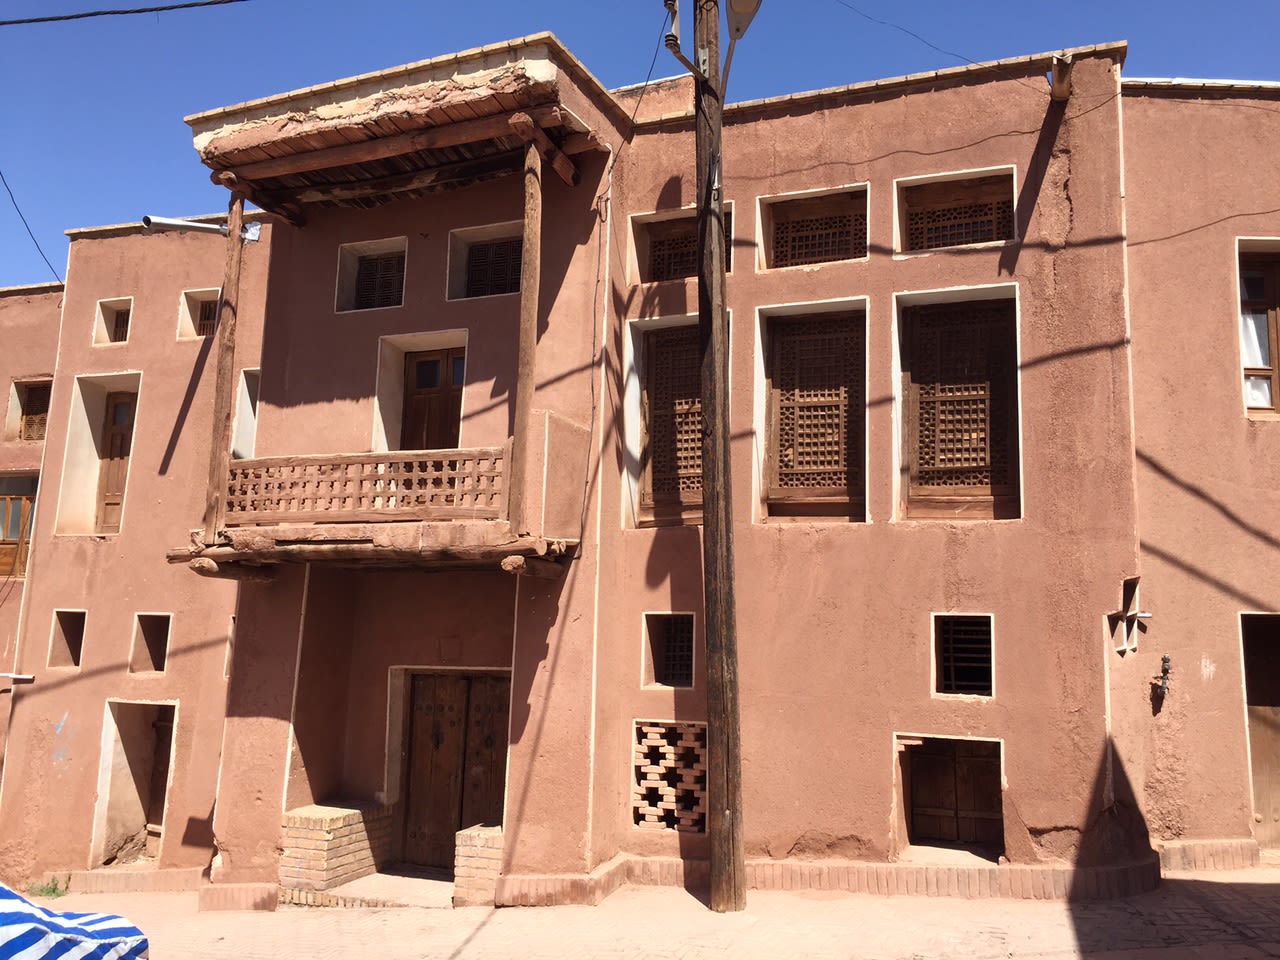 The buildings get their unique, red color from mud bricks.